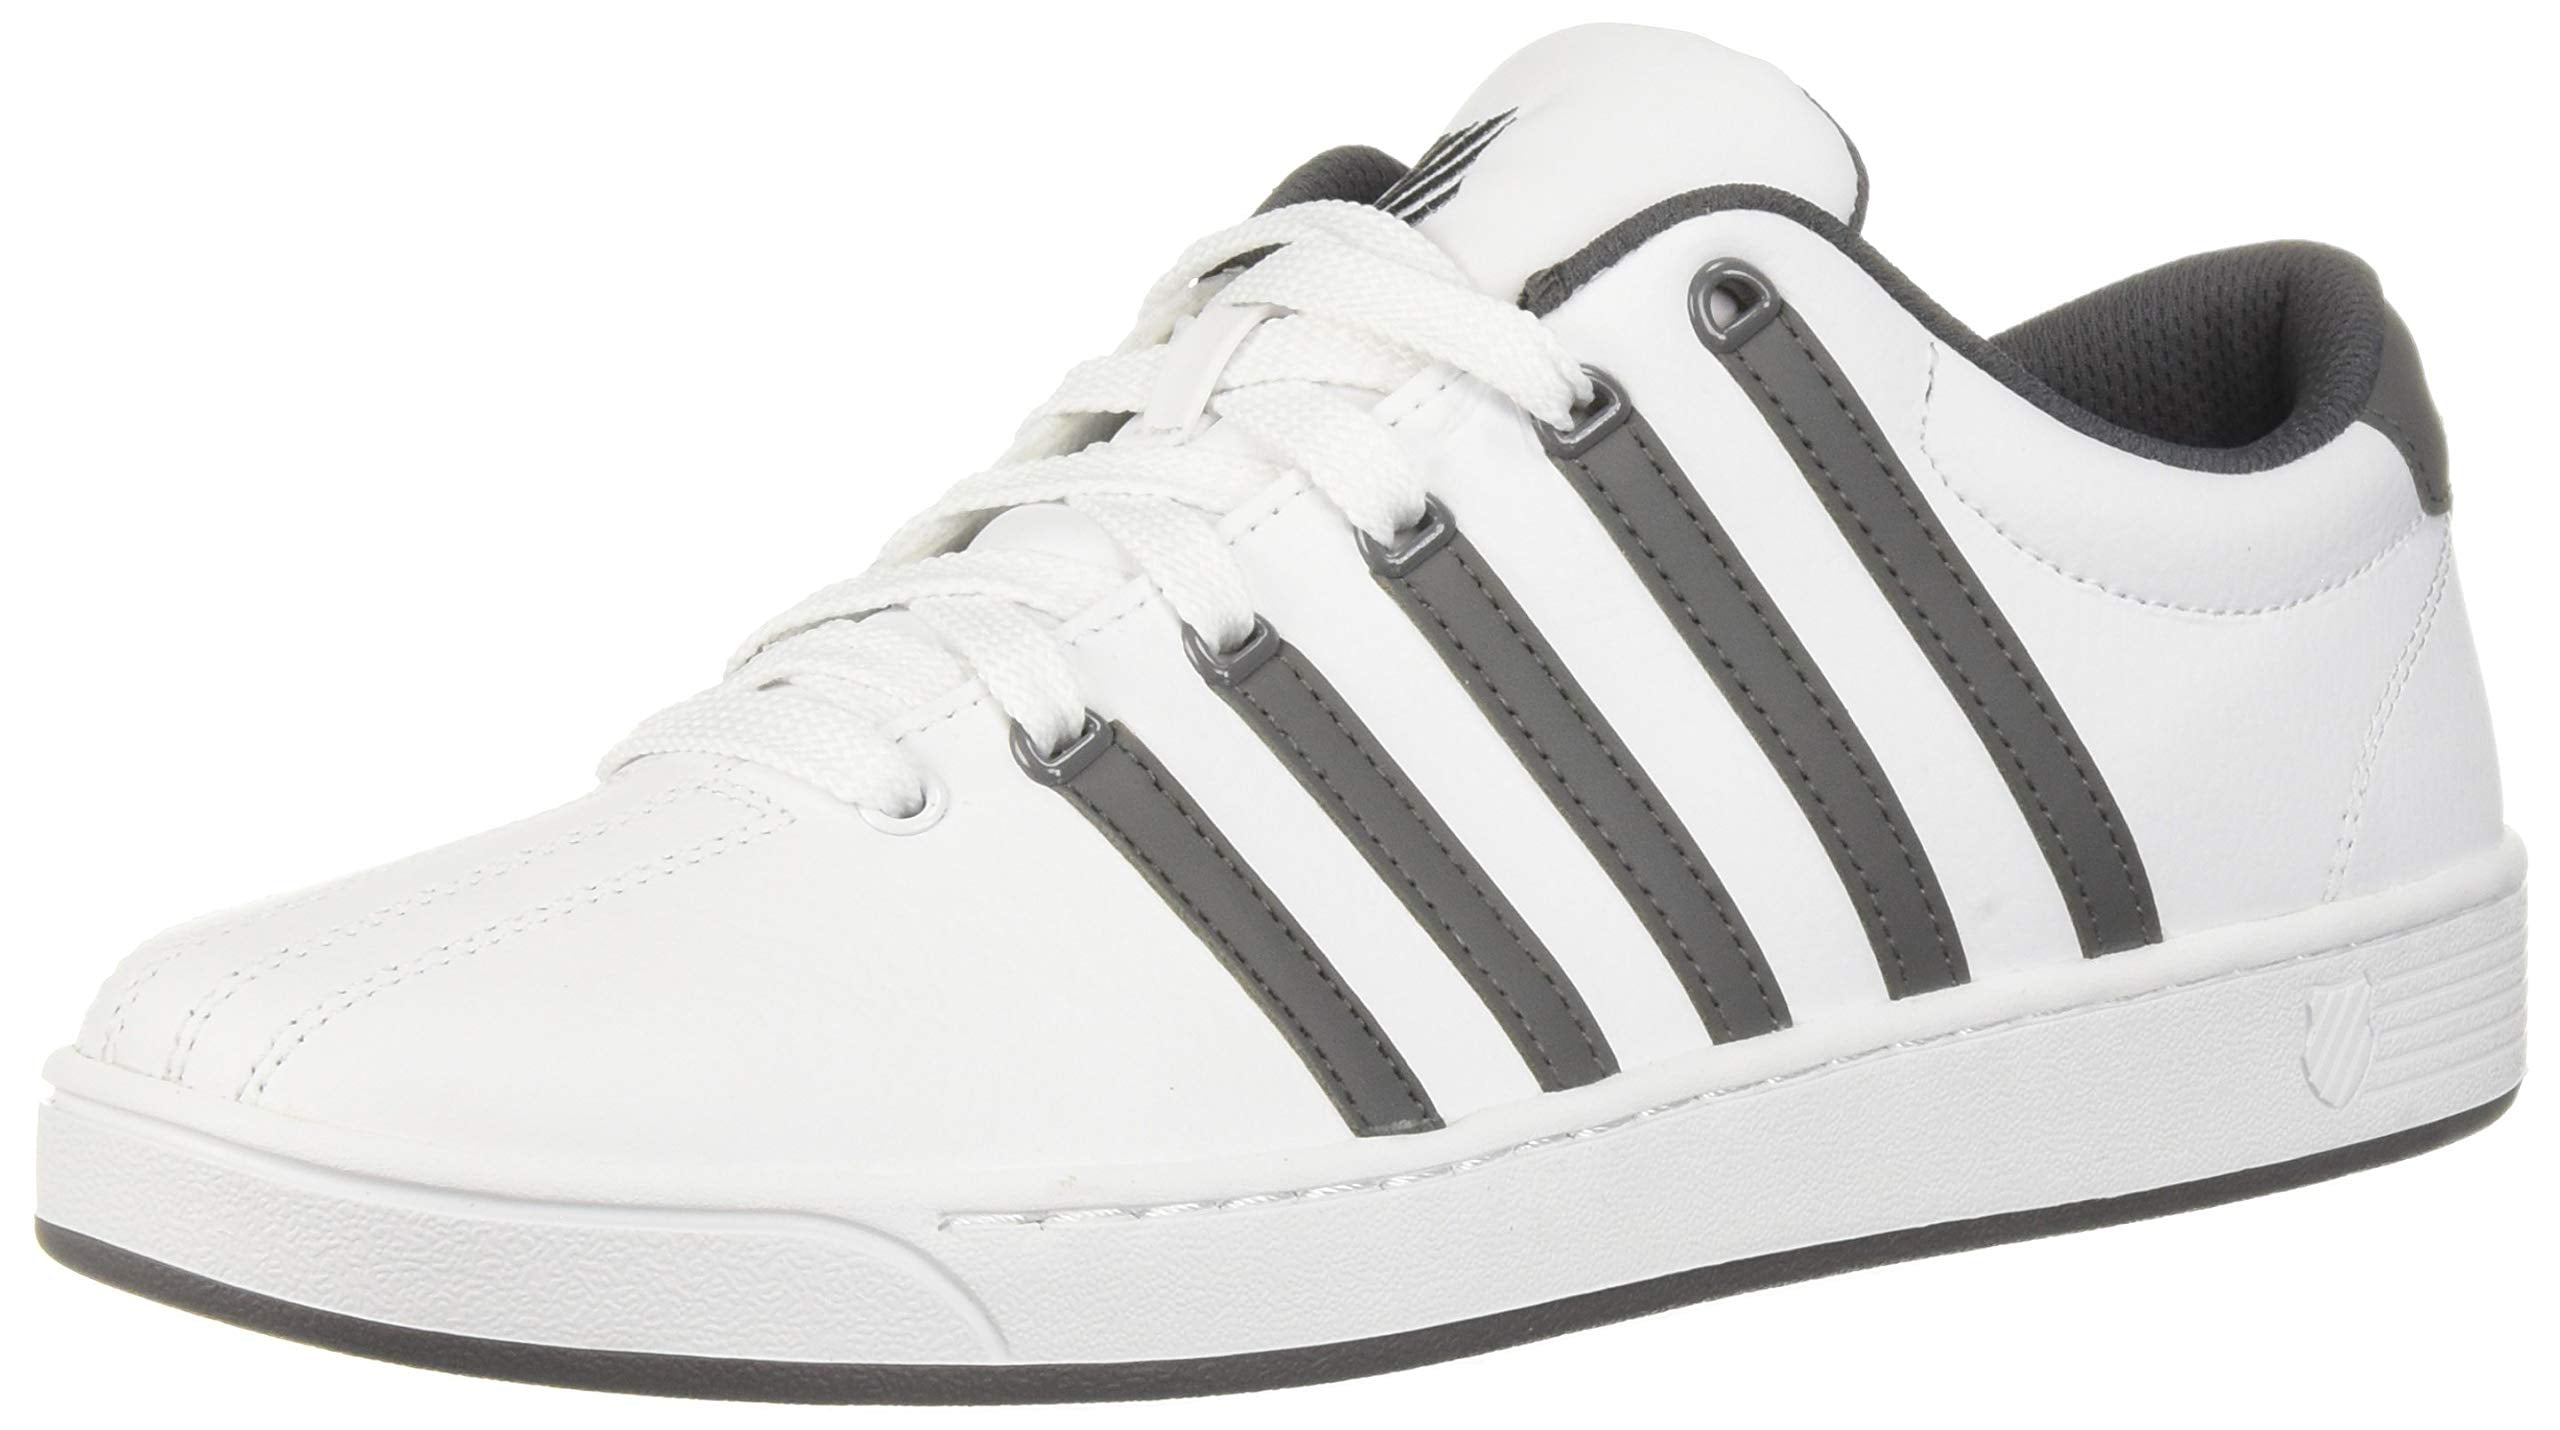 Clearance D 019 K Swiss Clean Court Mens Casual Training Shoes 